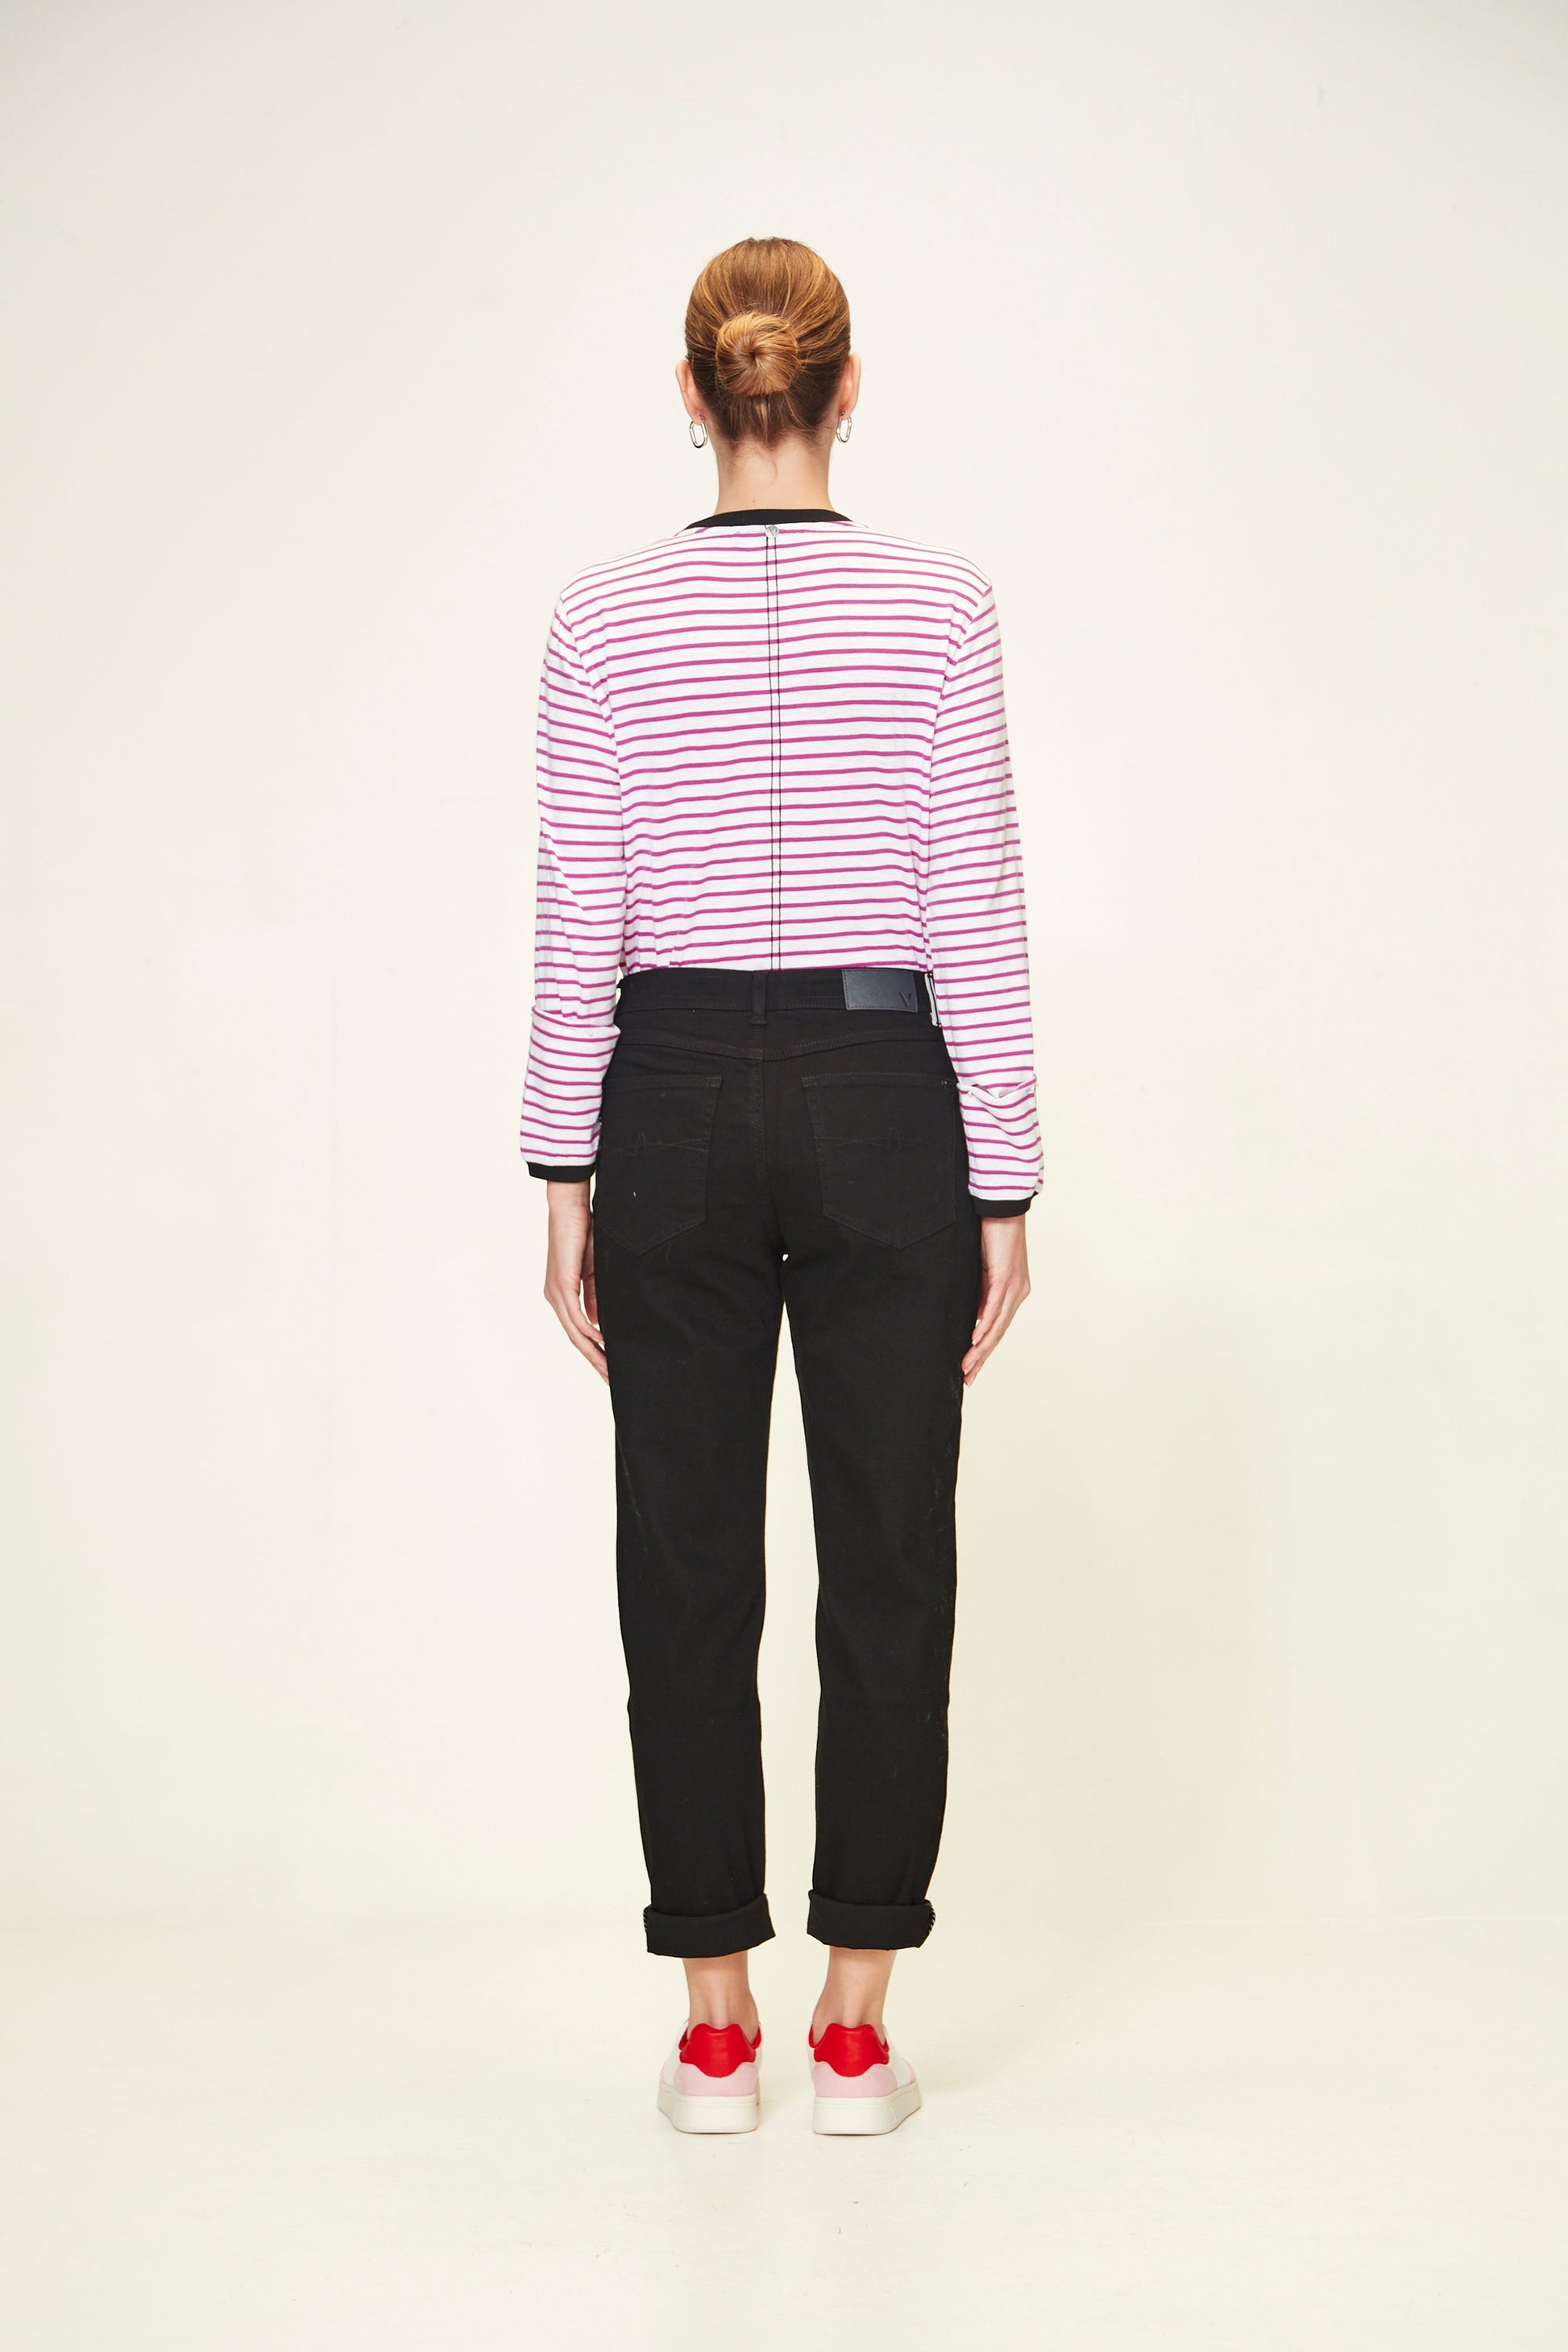 VERGE KIT TOP - ORCHID STRIPE - THE VOGUE STORE